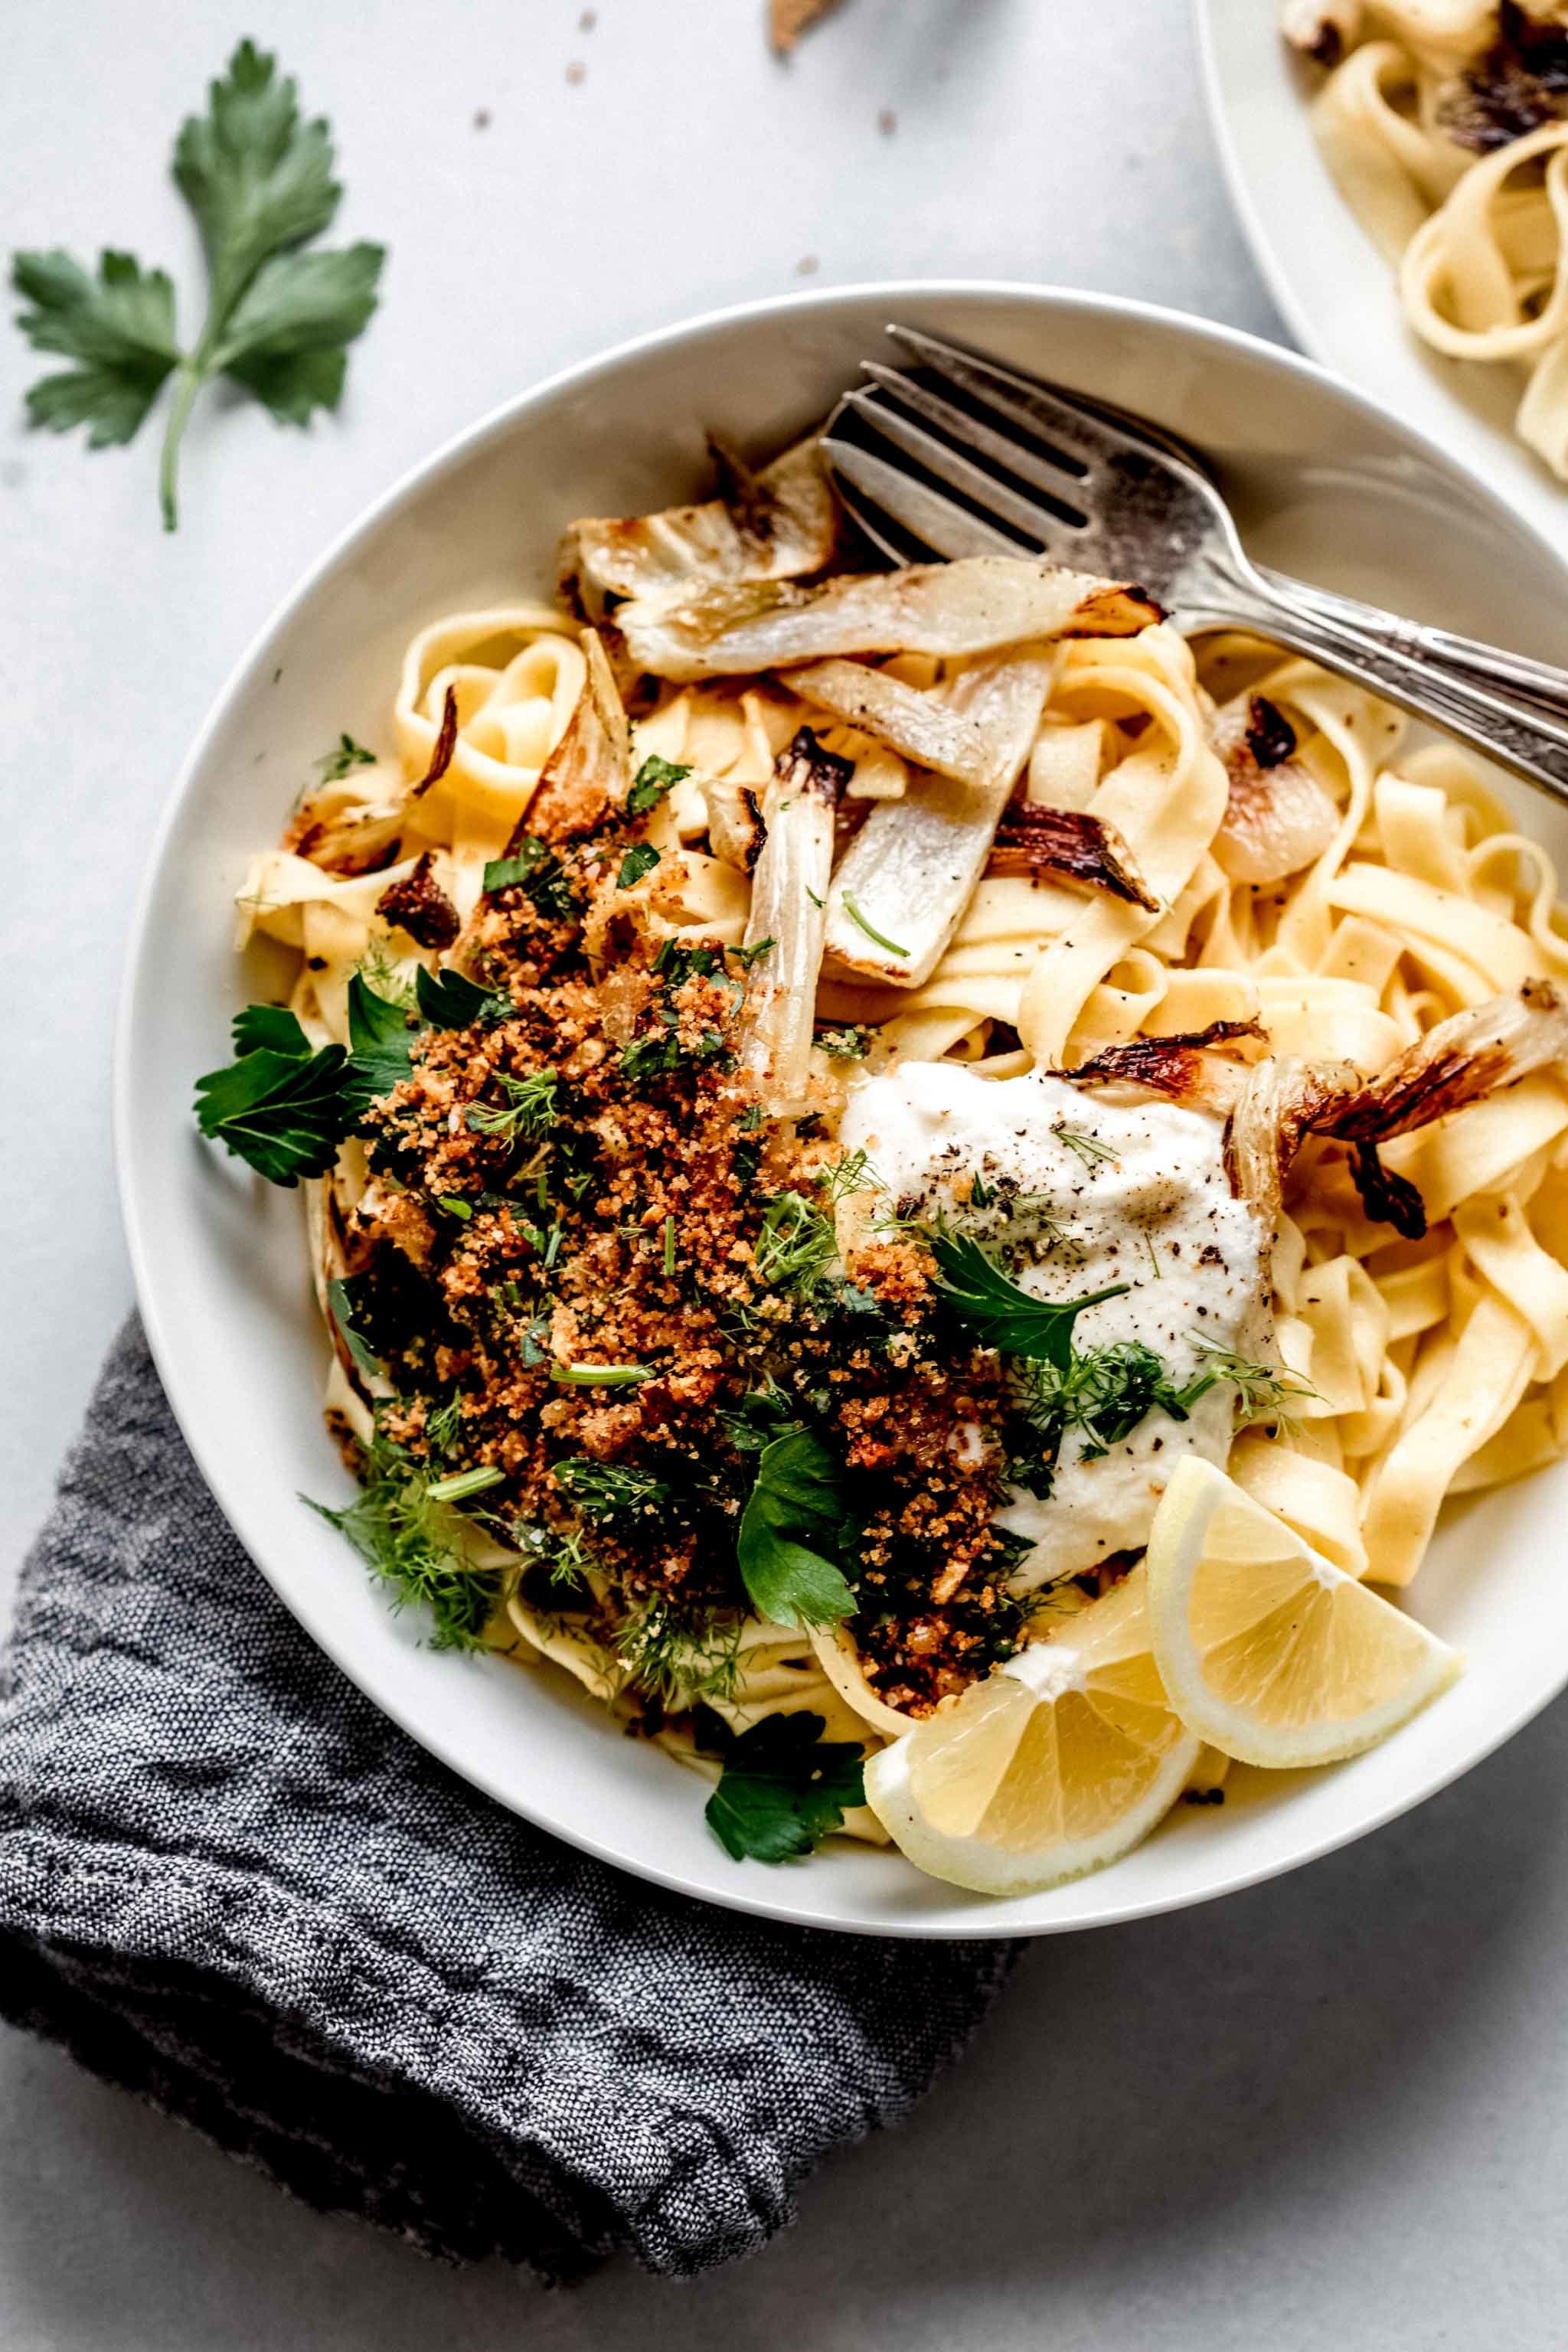 Linguine with roasted fennel.